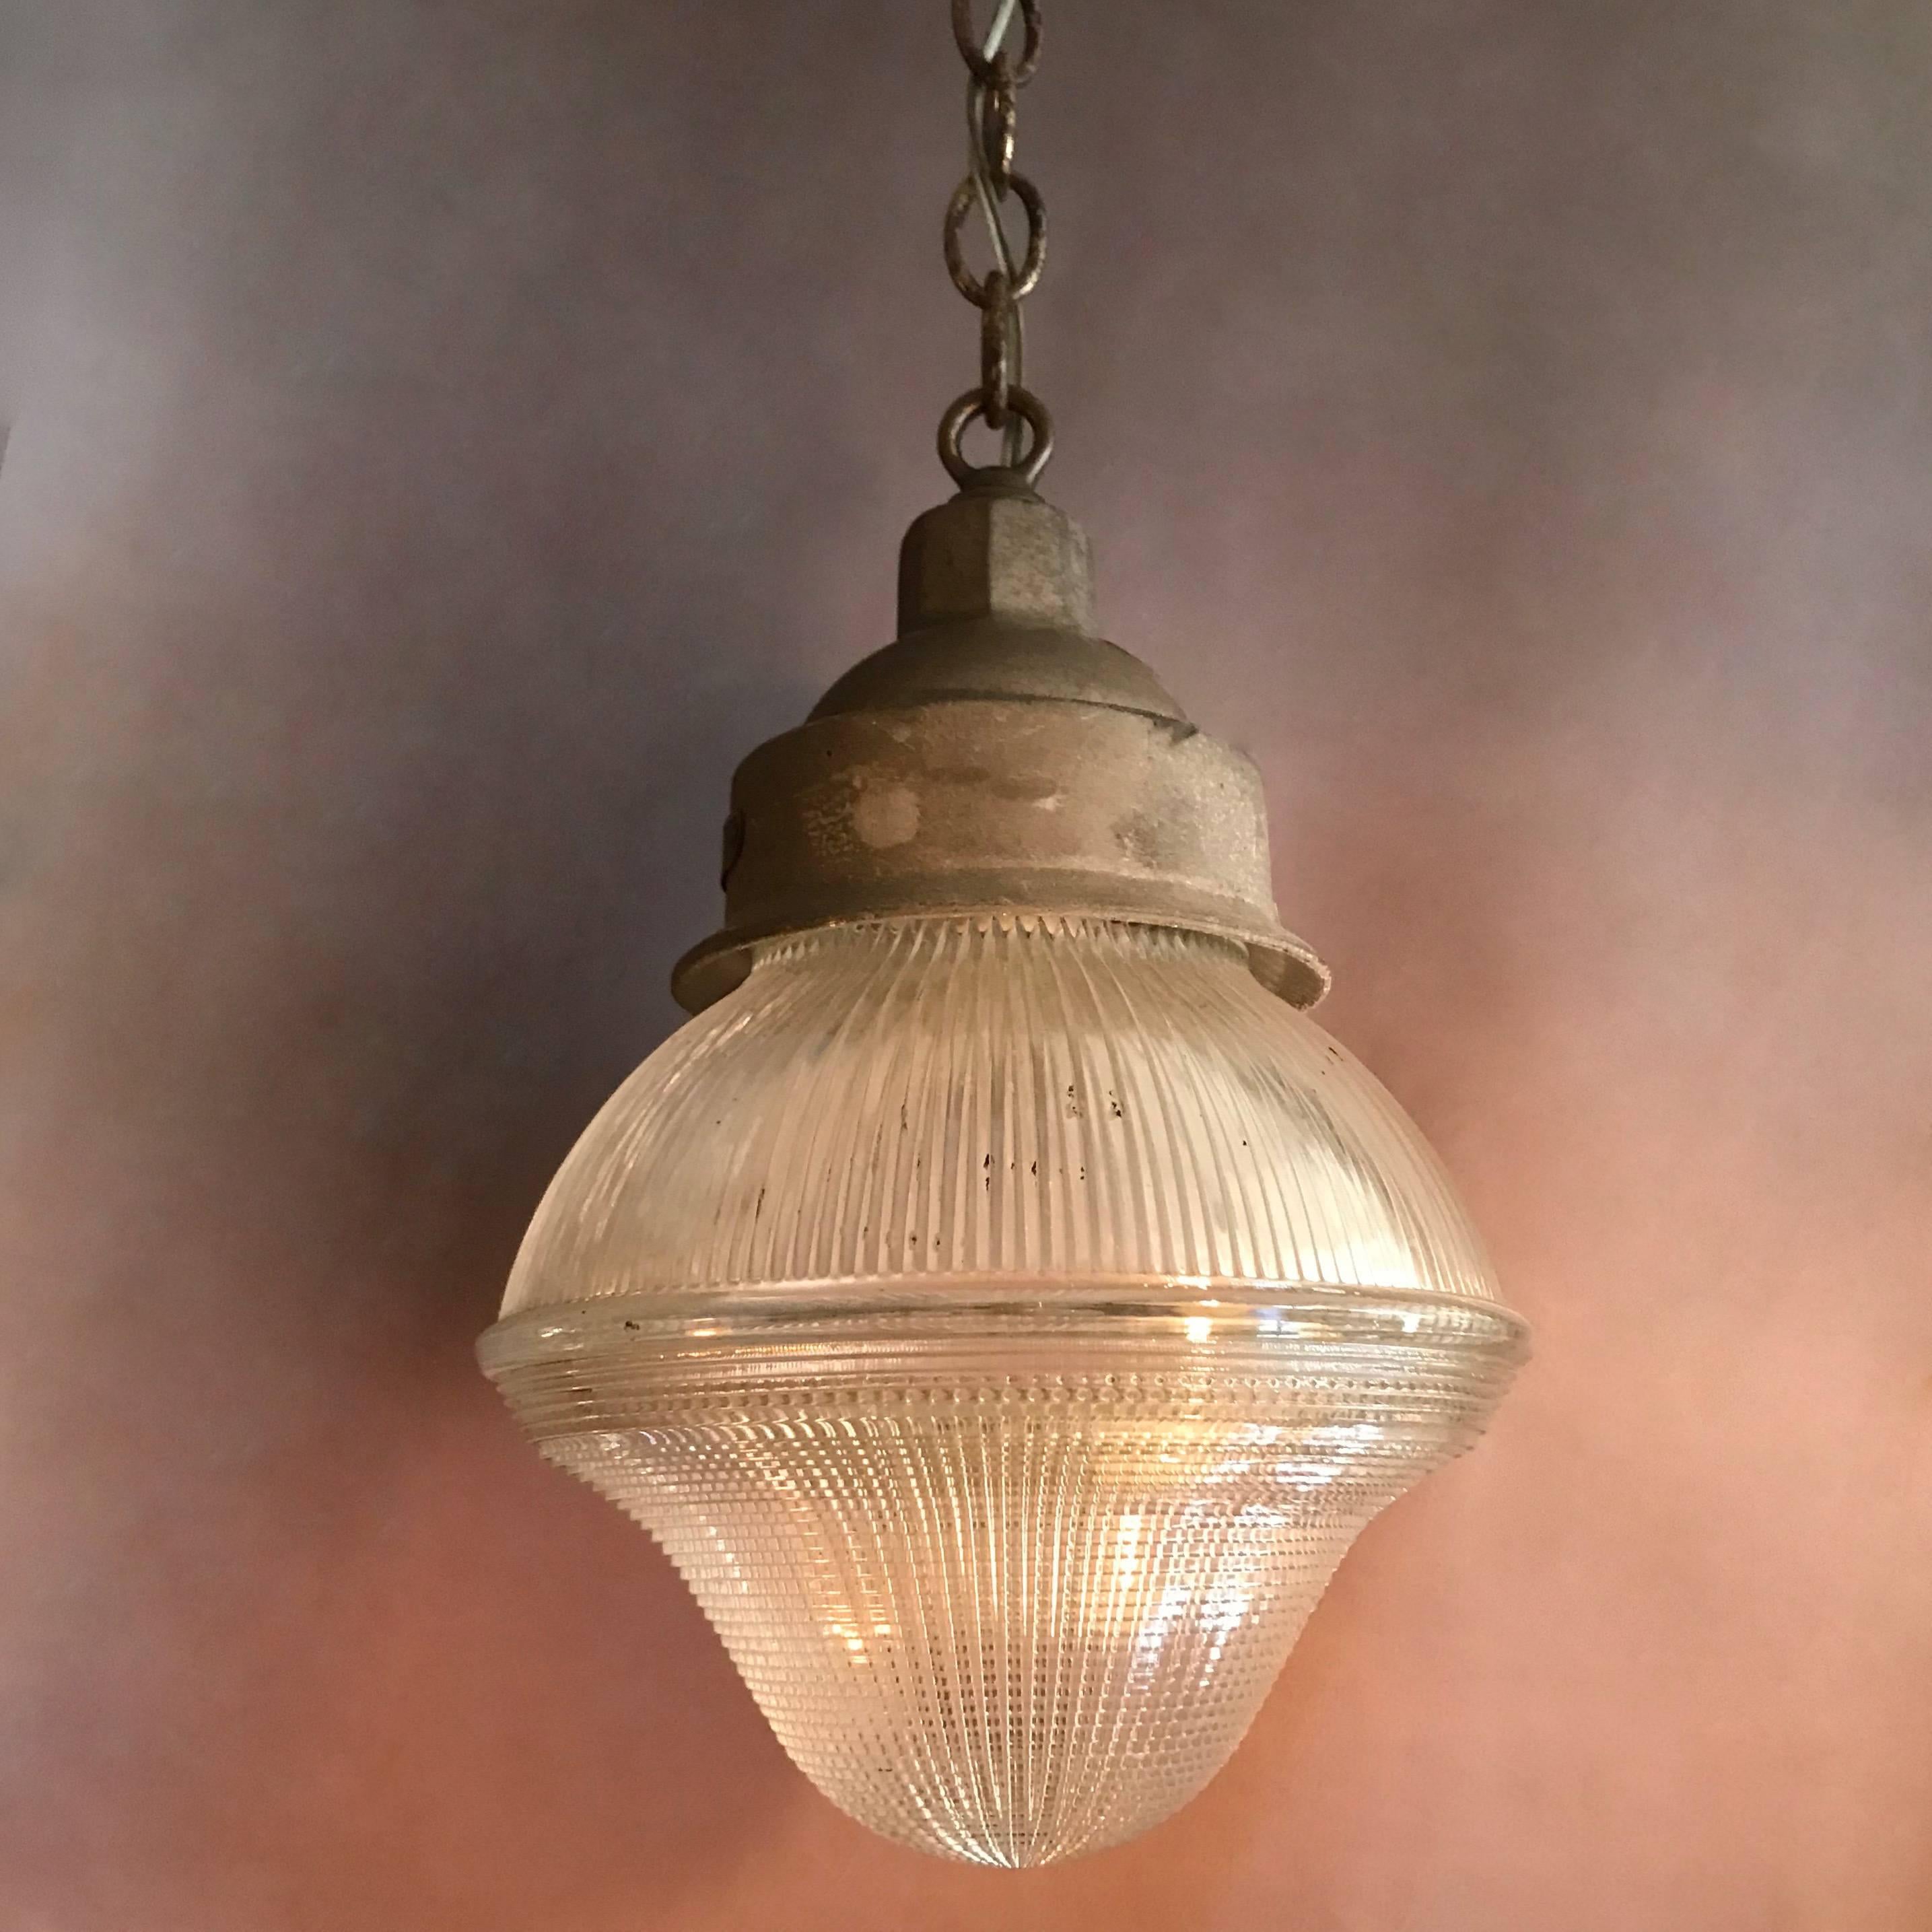 Industrial, factory, pendant light features an acorn shape, Holophane glass shade with contrasting prismatic patterns on a cast iron fitter and steel chain and canopy that hangs 30 inches fully extended. The pendant is newly wired to accept up to a